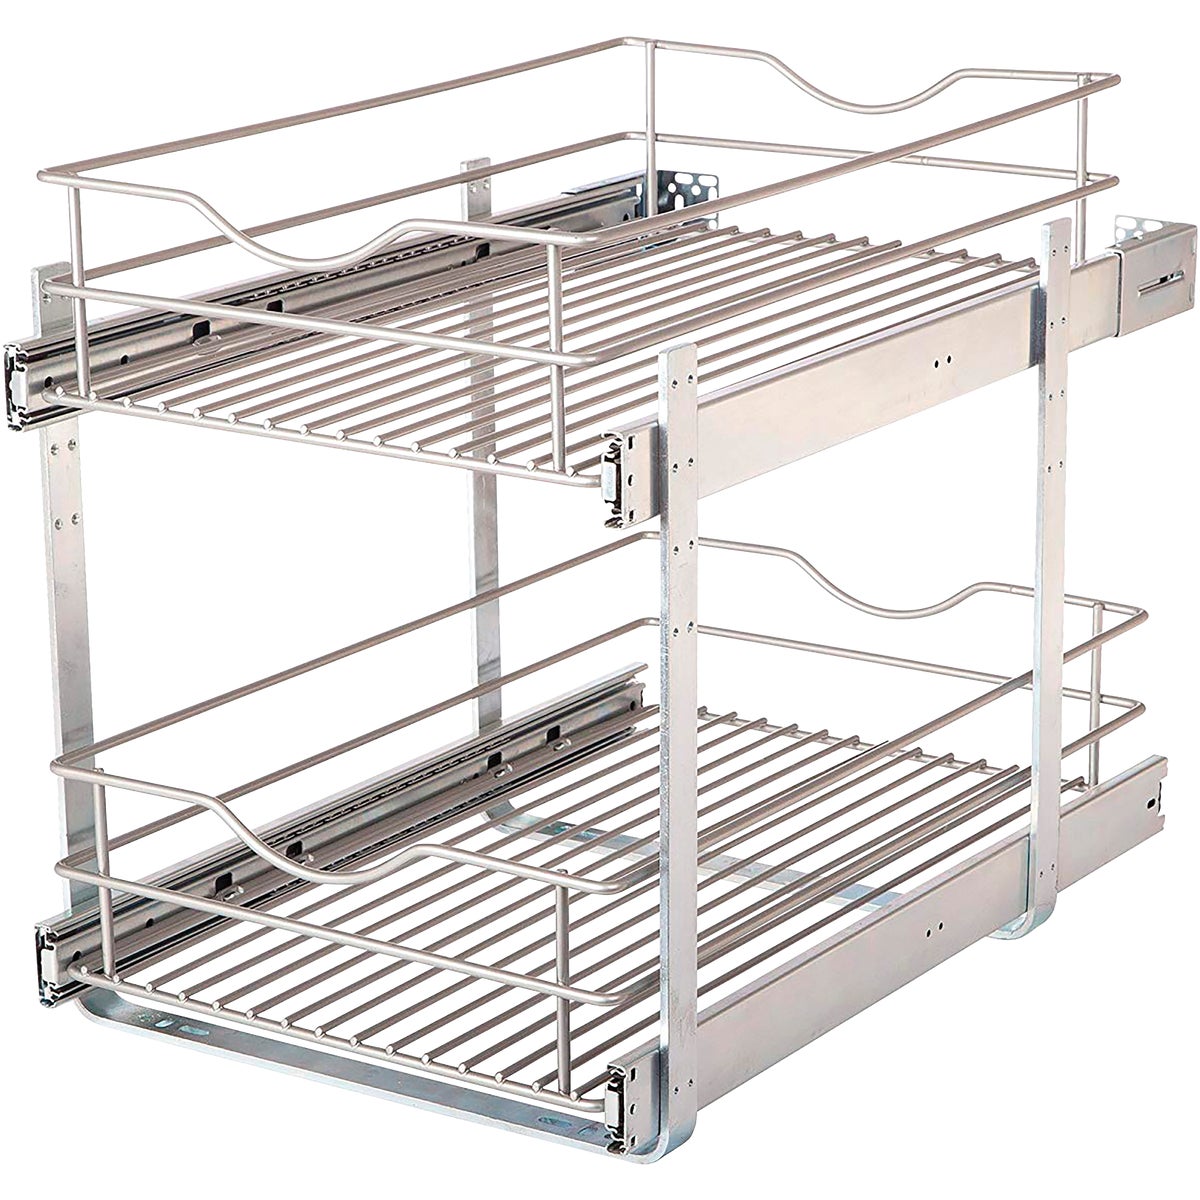 Real Solutions Knape & Vogt RS-DBLMUB-14-FN Knape & Vogt Real Solutions 14 In. Double Tier Slide Out Multi-Use Basket Cabinet Organizer RS-DBLM